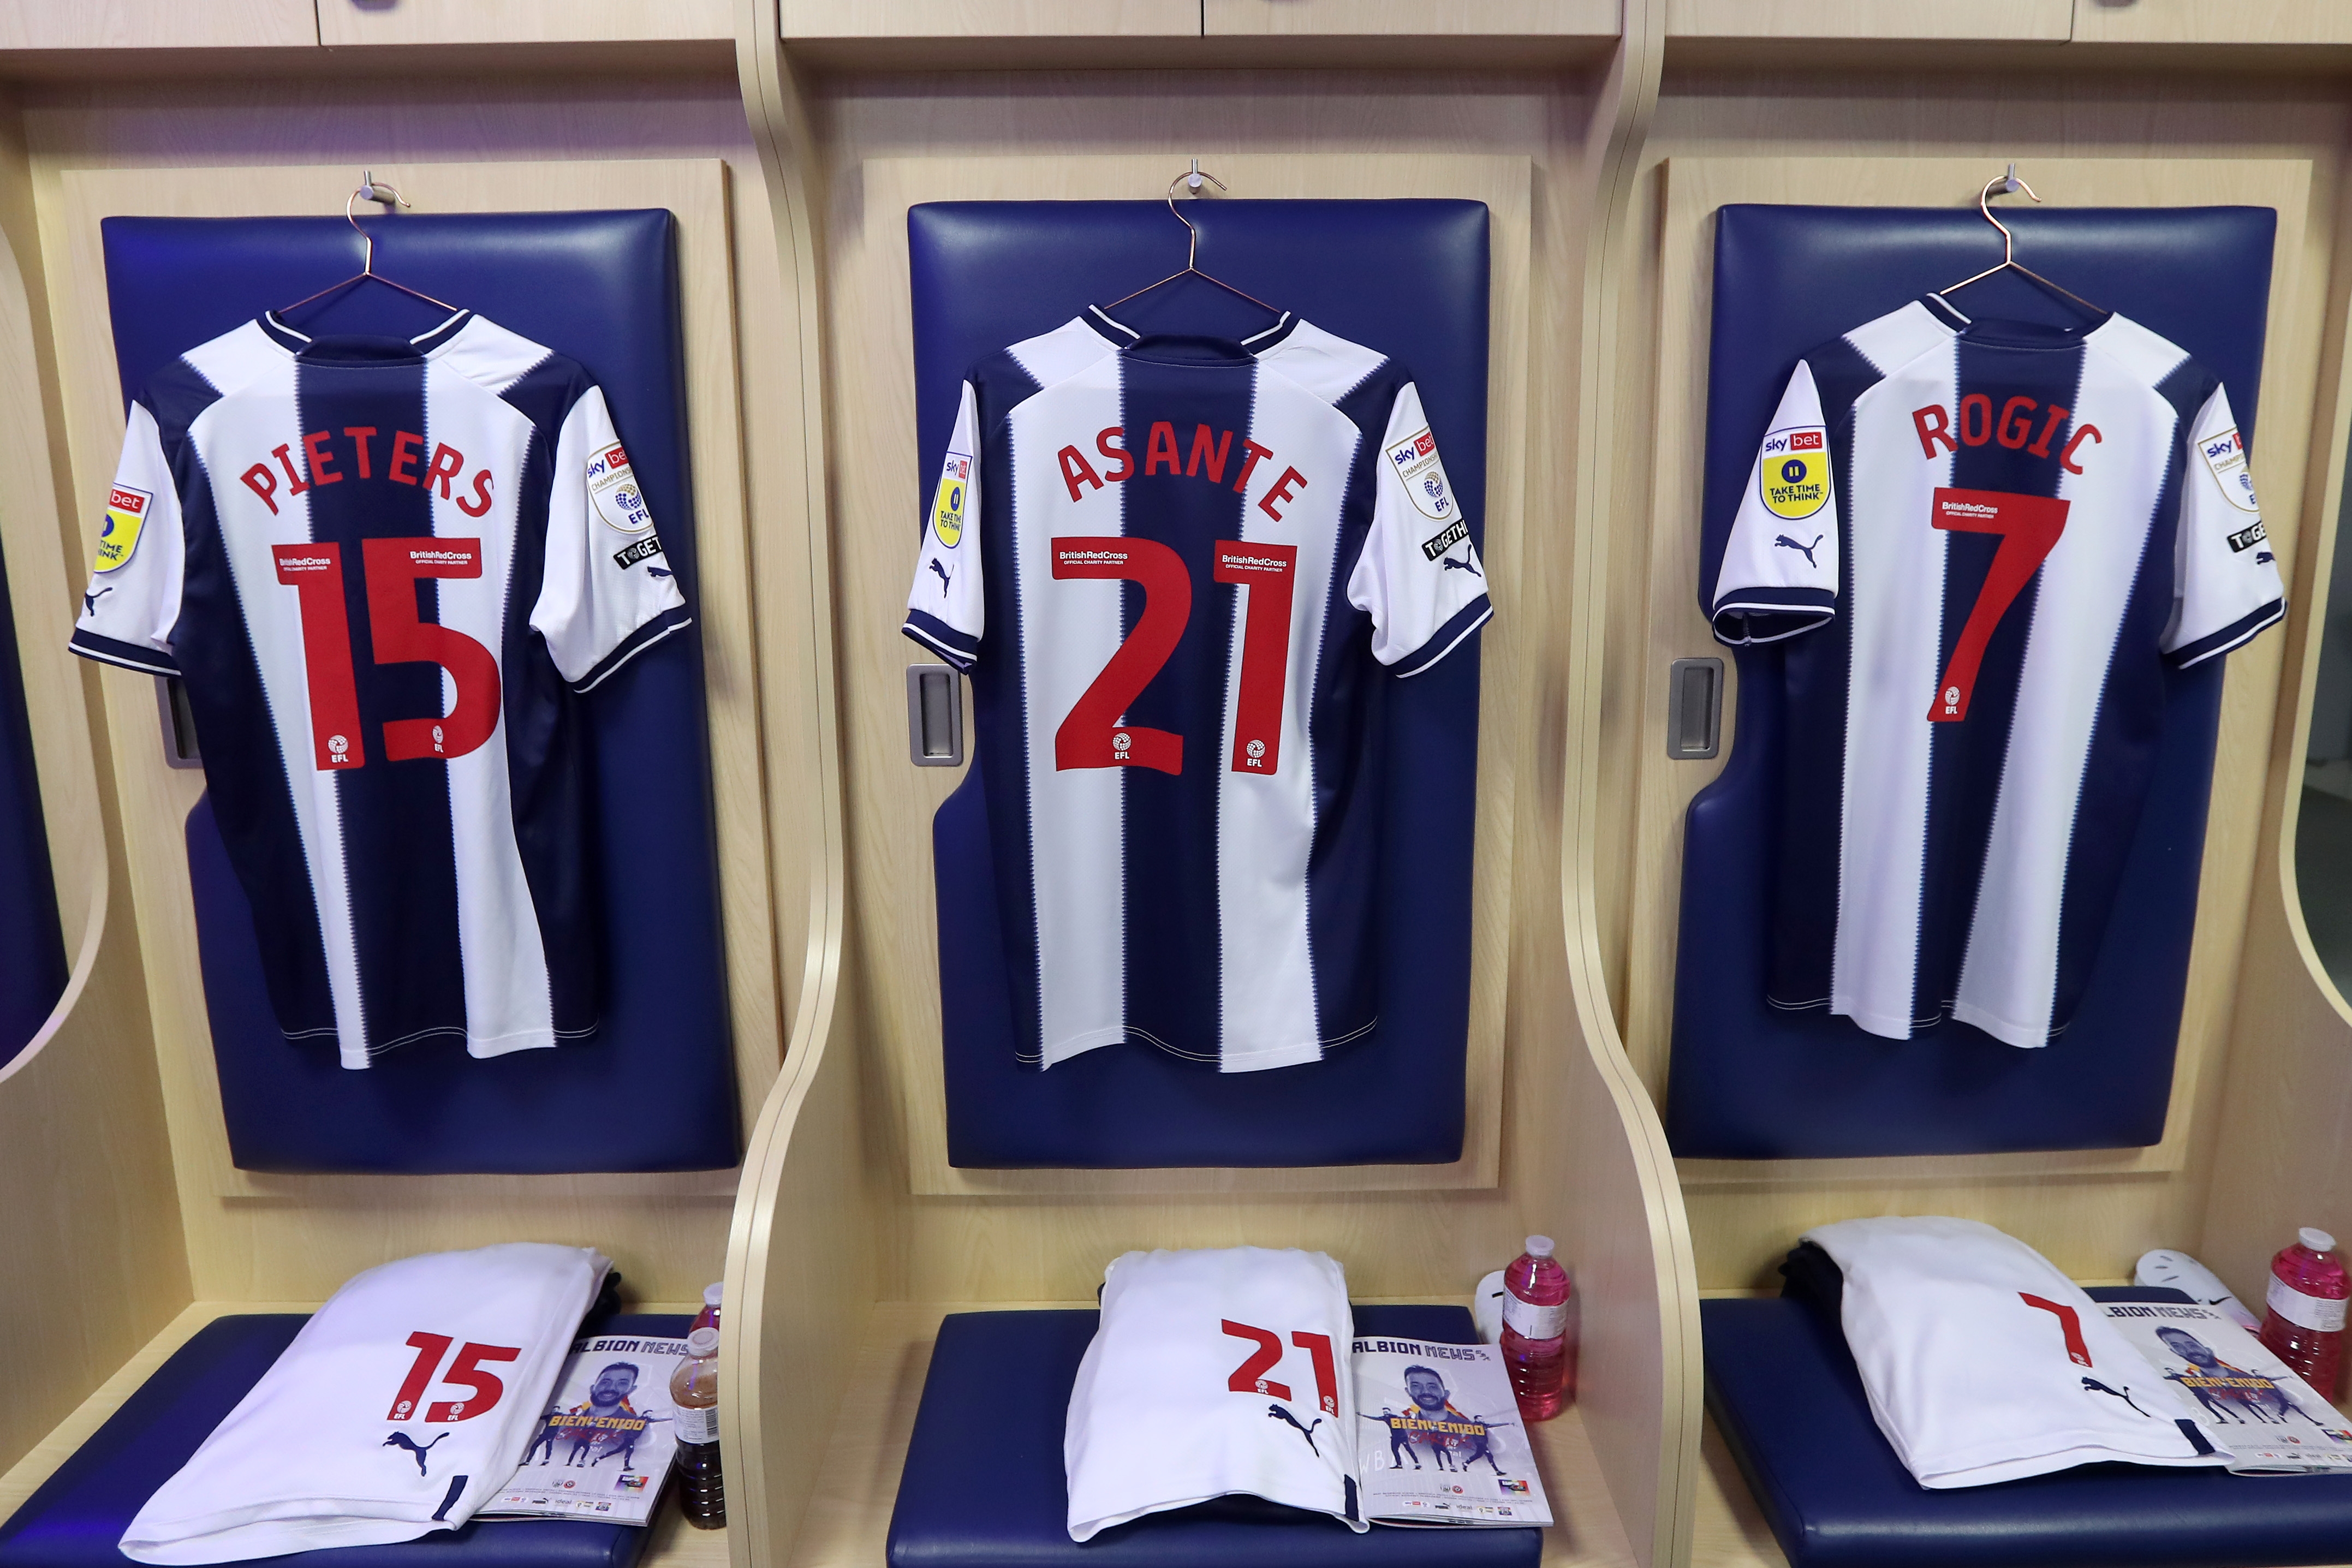 Albion home shirts hanging in the dressing room.